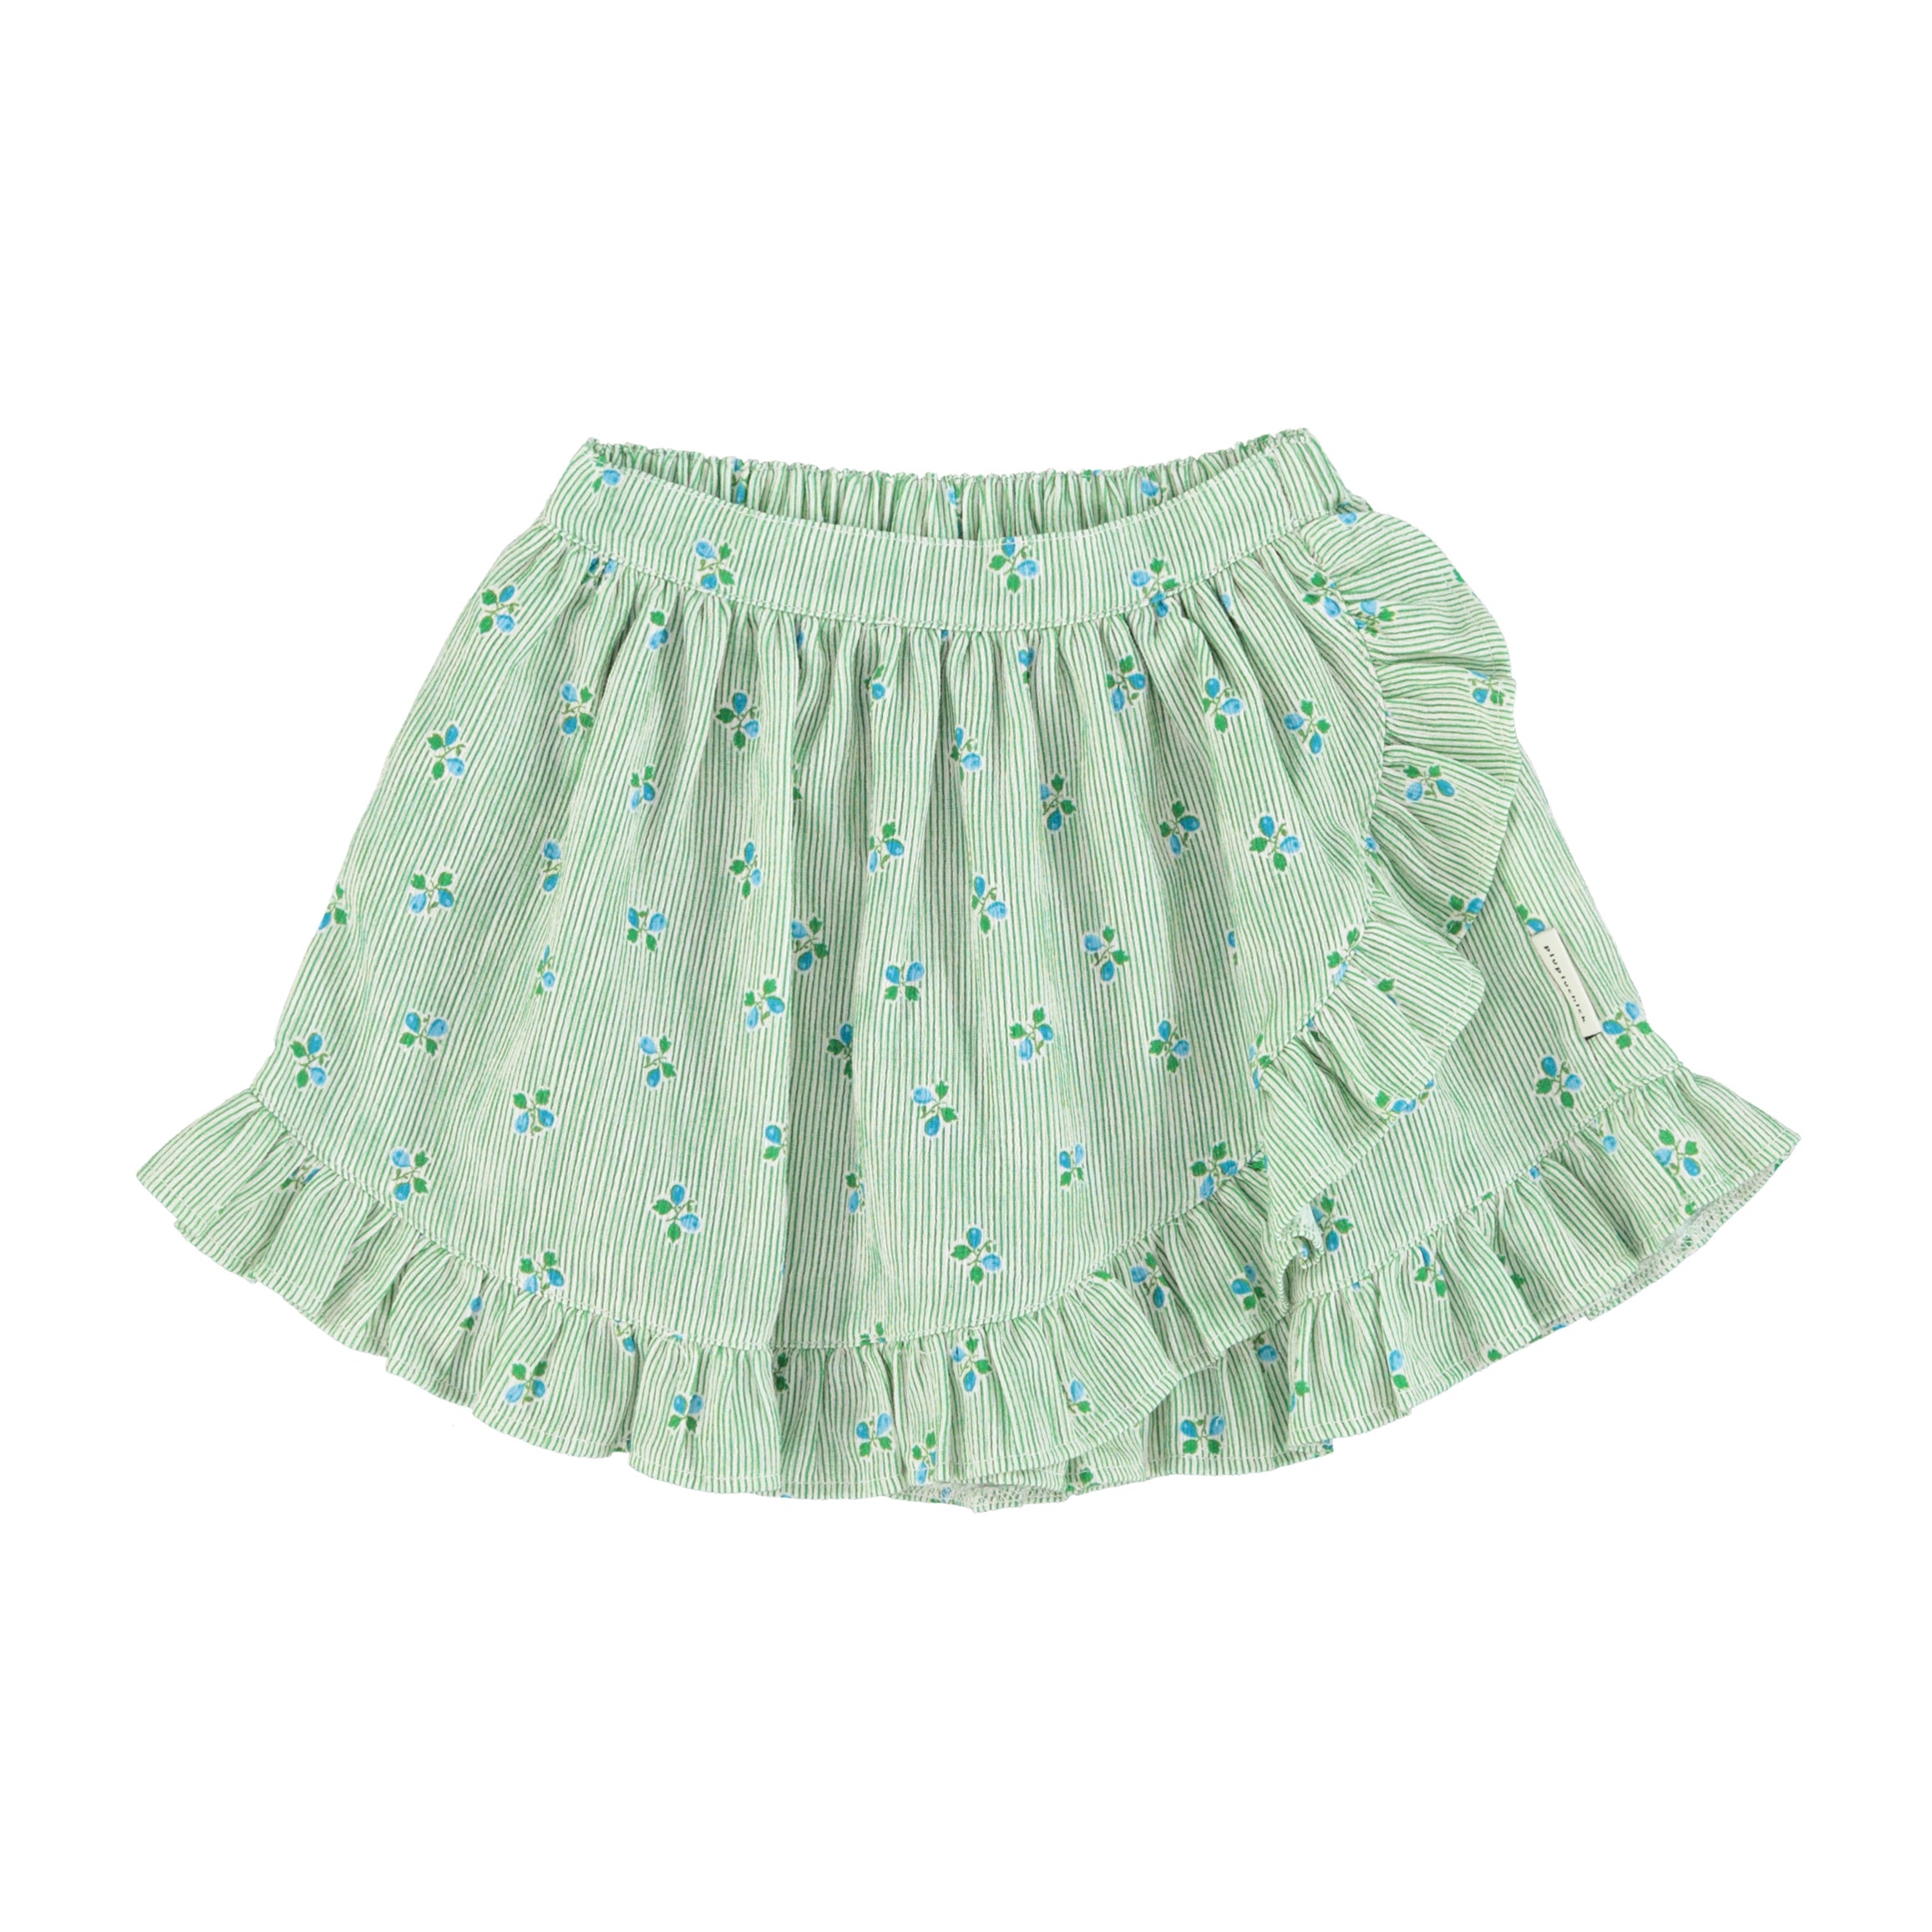 PIUPIUCHICK SMALL FLOWERS CROSSED FRONT WITH RUFFLES SKIRT